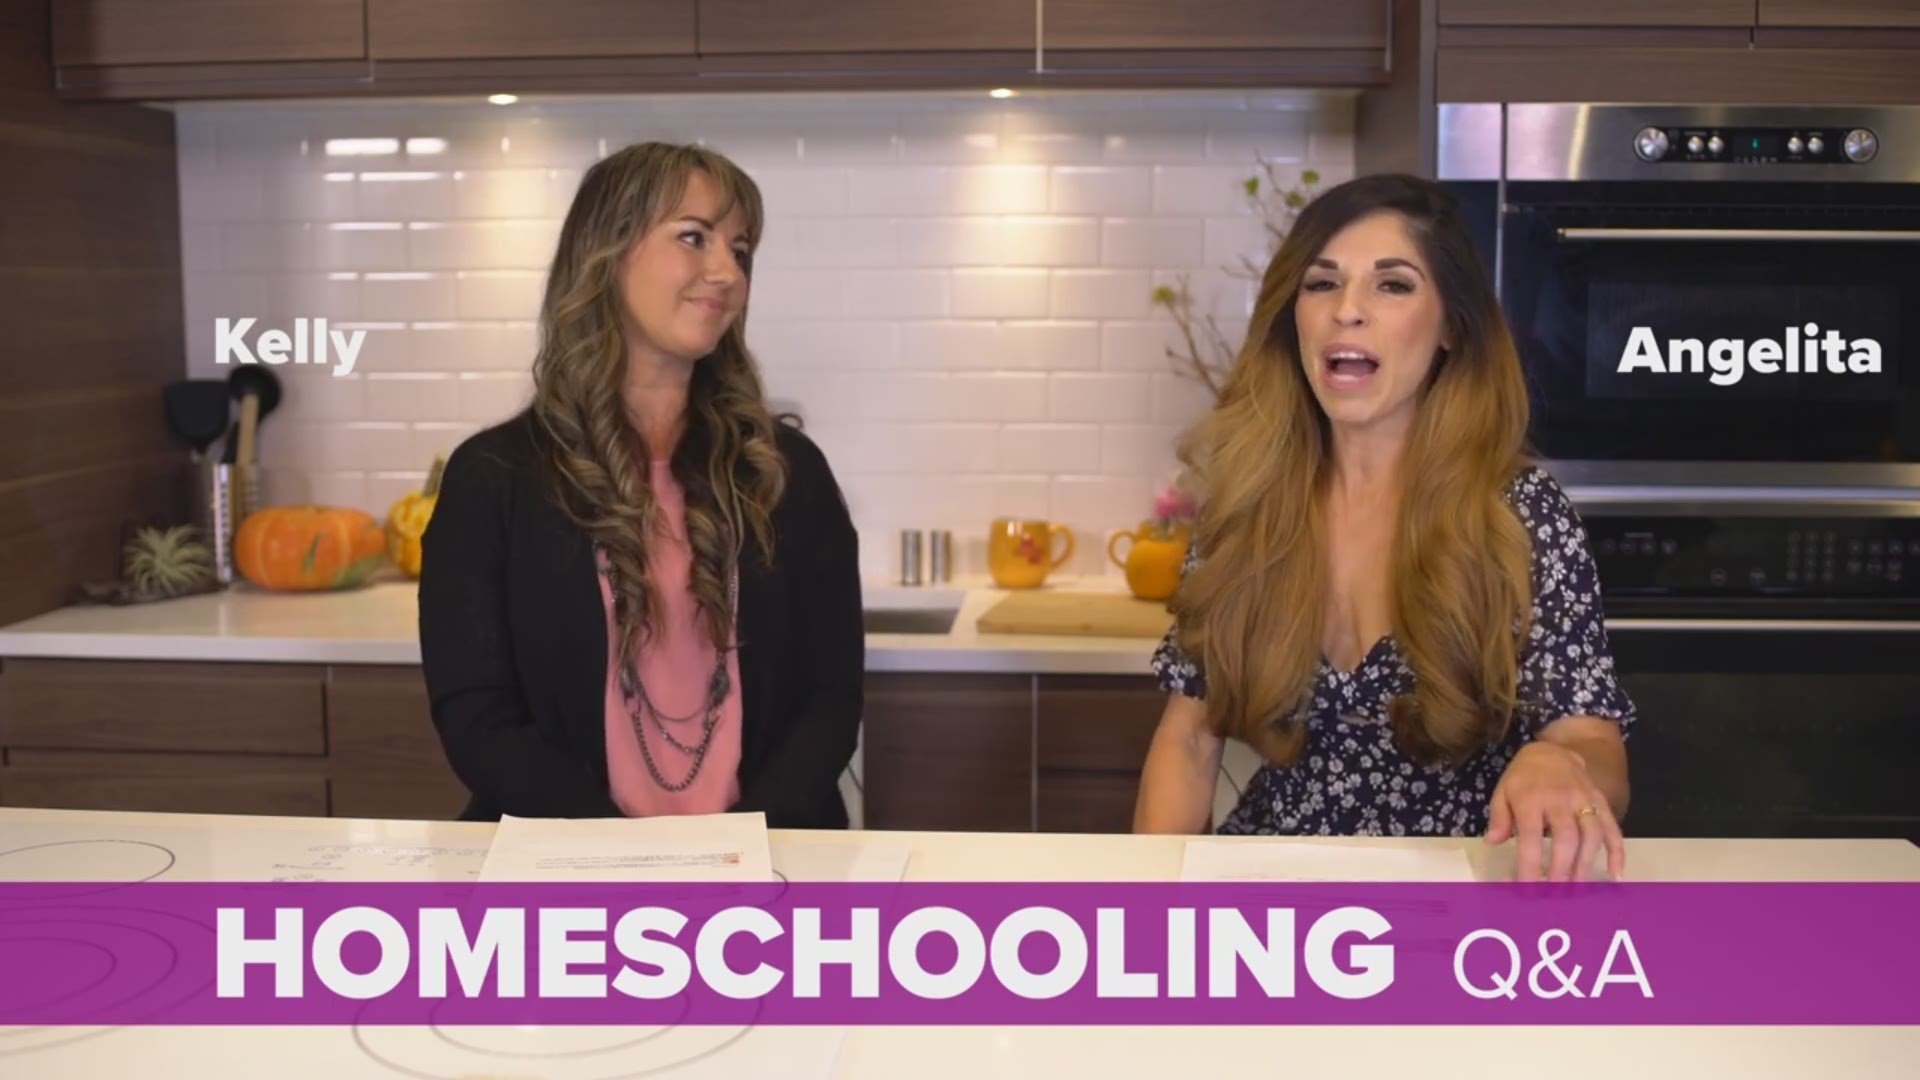 Is homeschooling right for my family? Two moms answer your questions from Three Moms and a Dad about homeschooling.